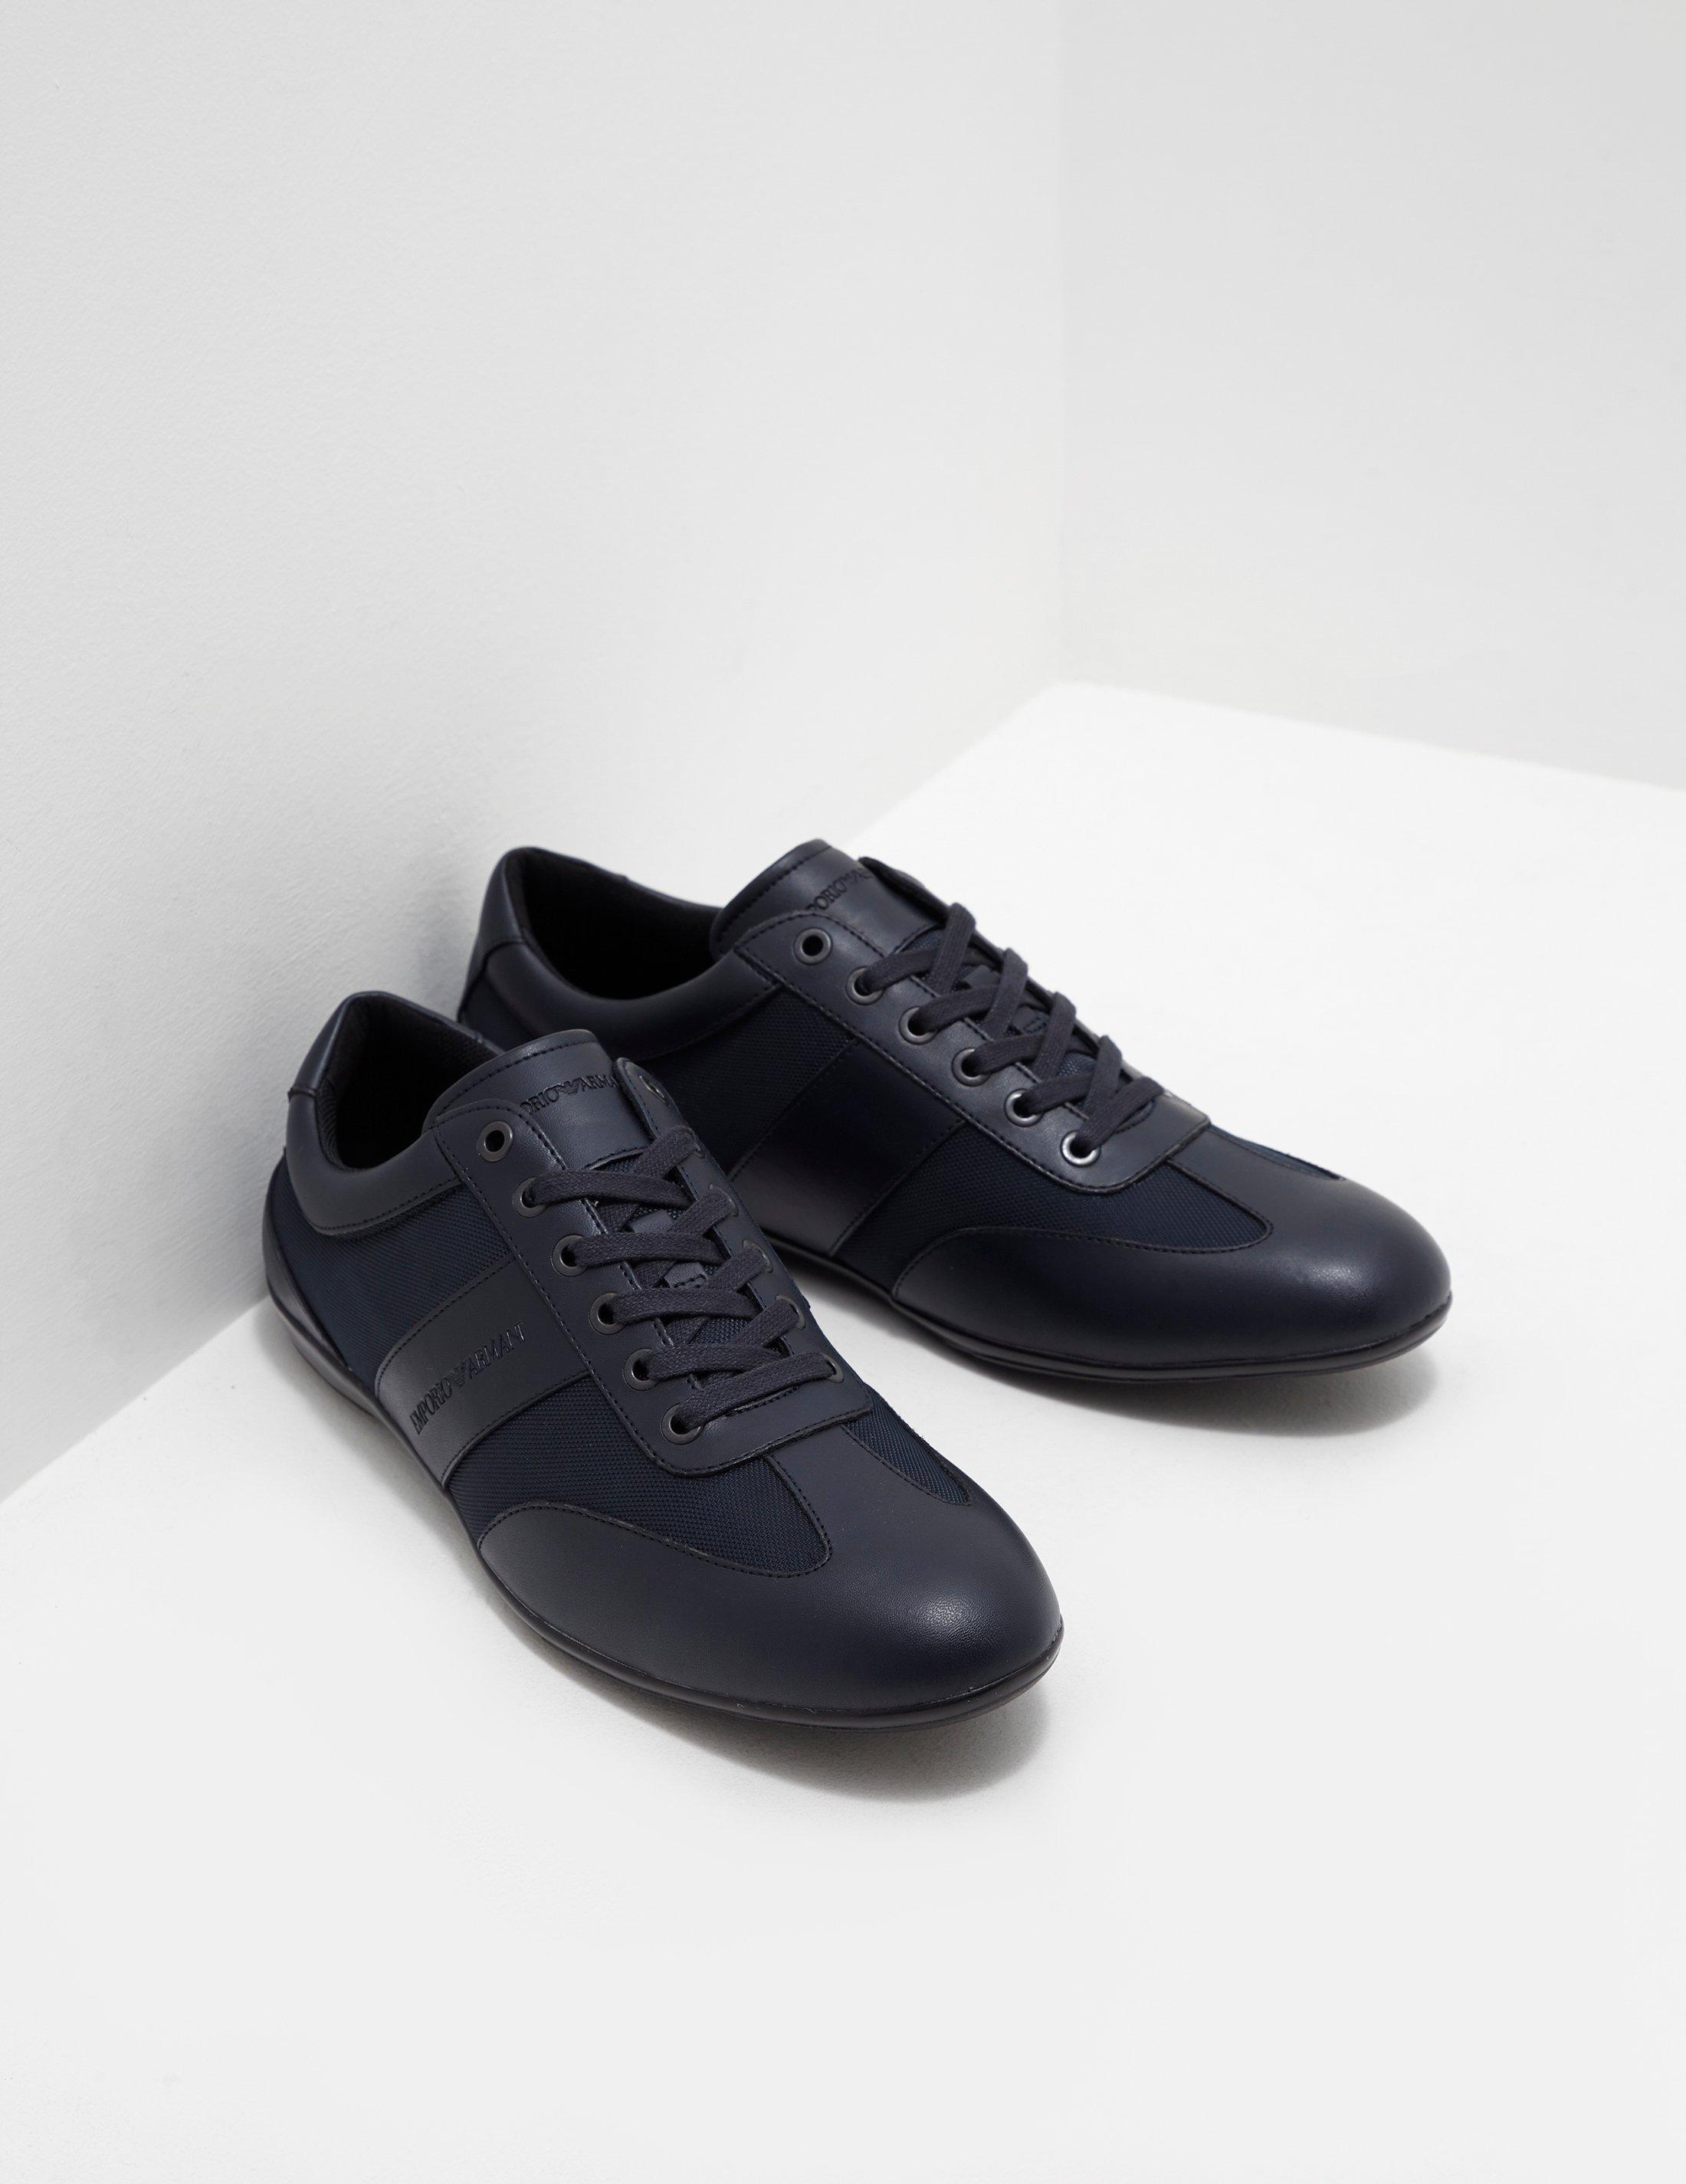 Pro Trainers Navy Blue for Men - Lyst